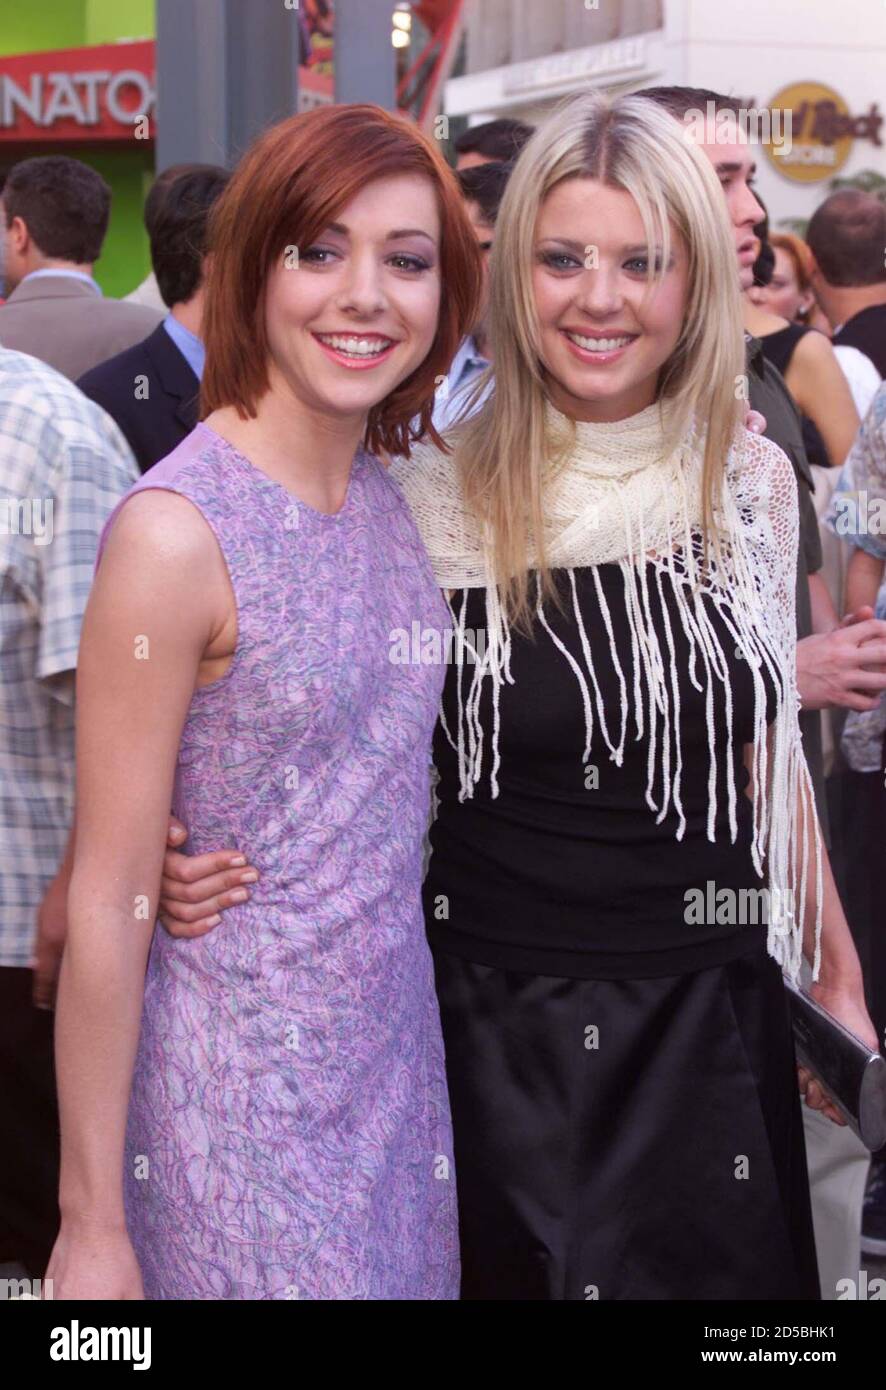 Actresses Alyson Hannigan (L) and Tara Reid, two of the ensemble cast members of the comedy film ' American Pie' arrive for the film's premiere July 7 in Los Angeles. The film opens July 9 in the United States explores a group of teenagers and their quest to lose their virginity.  FSP Stock Photo